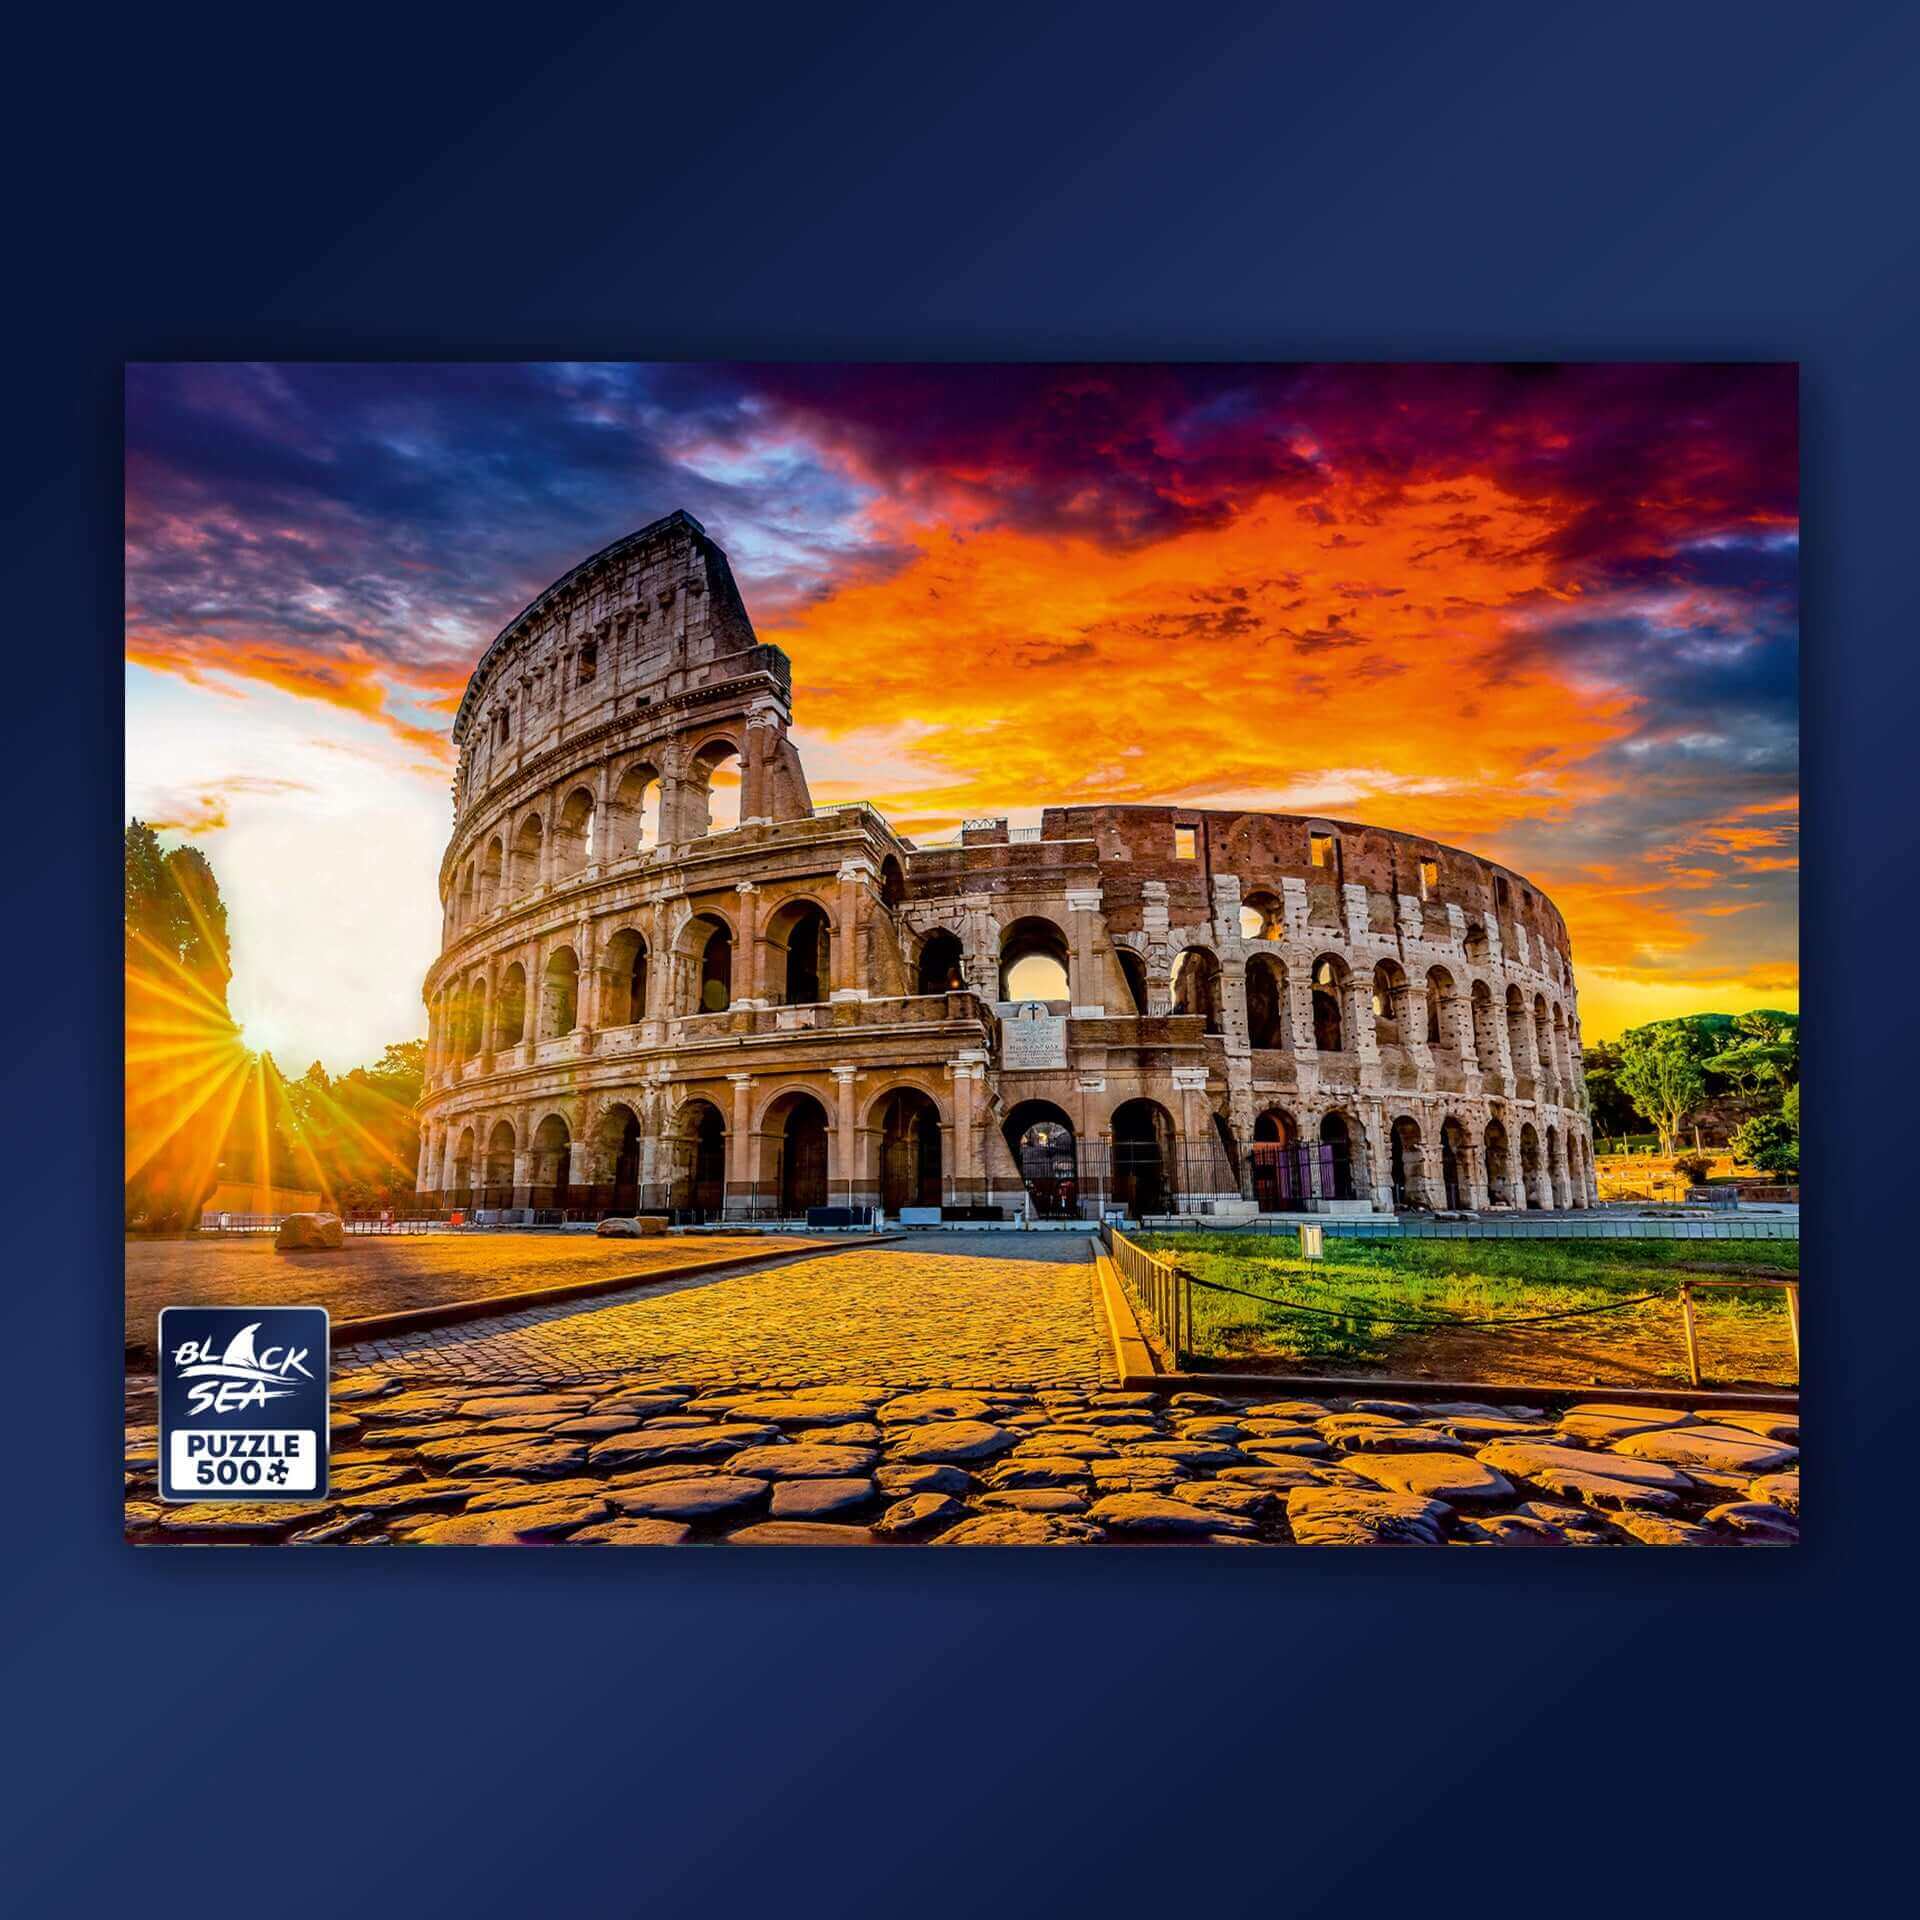 Puzzle Black Sea 500 pieces - Sunset over the Colosseum, -